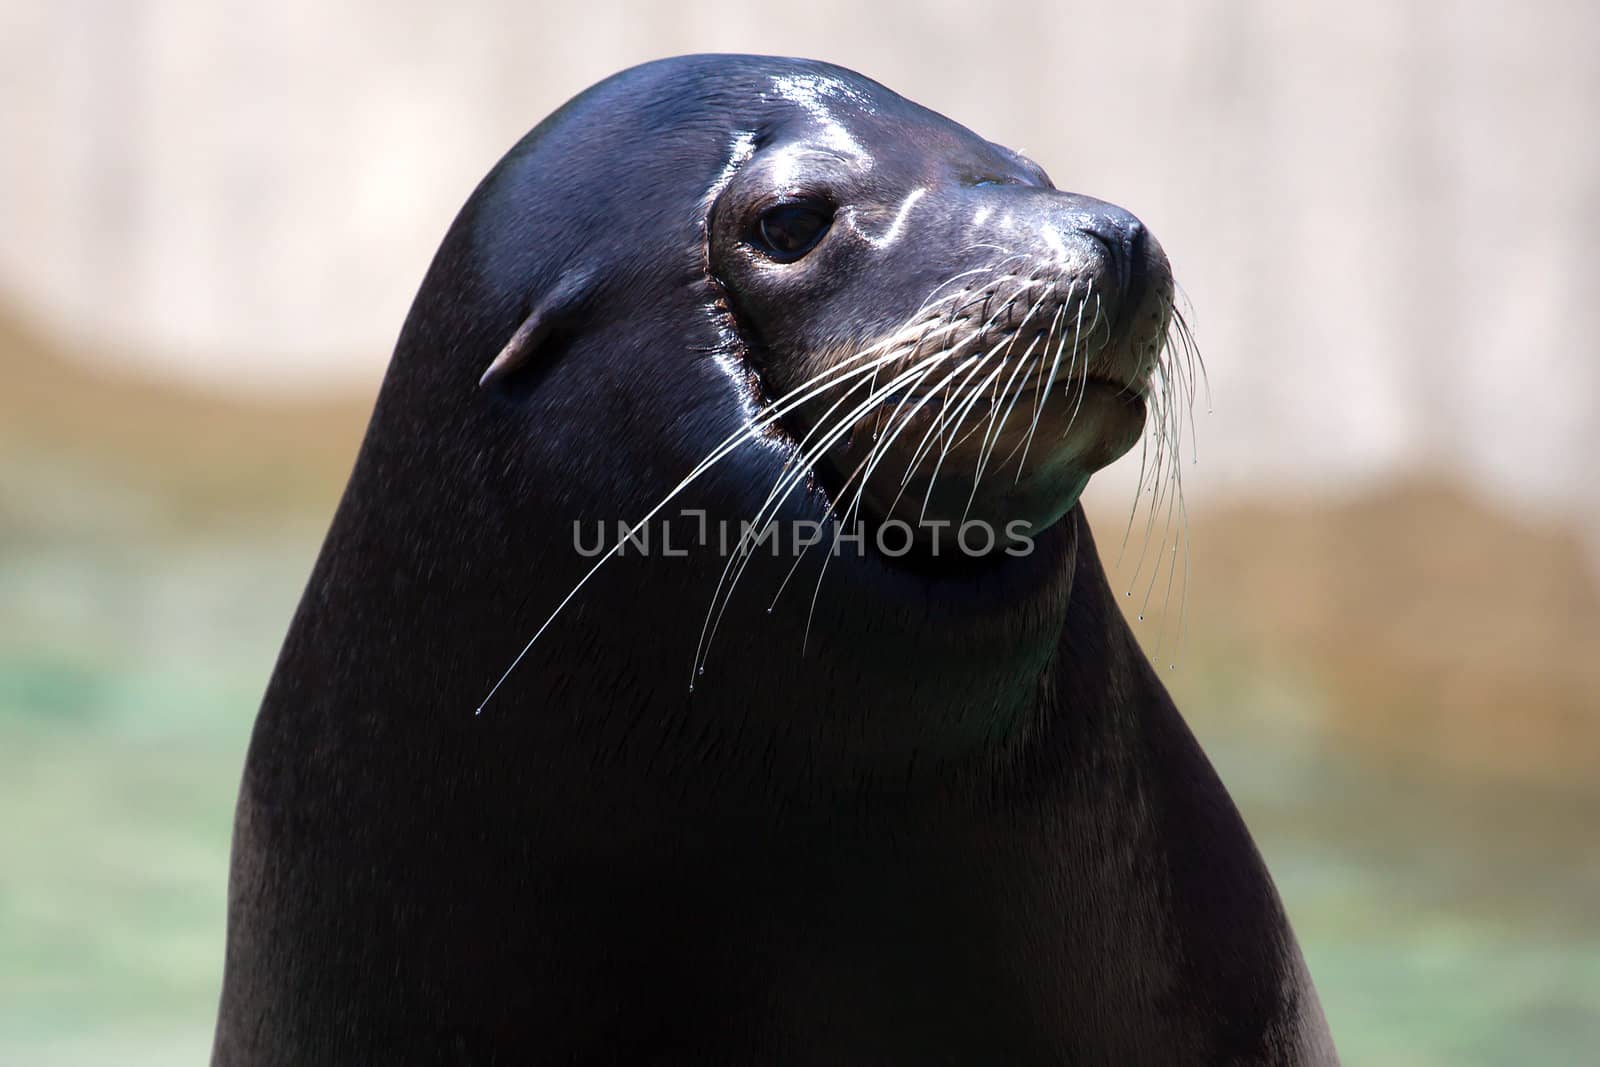 Seal posing for a photograph at the zoo.